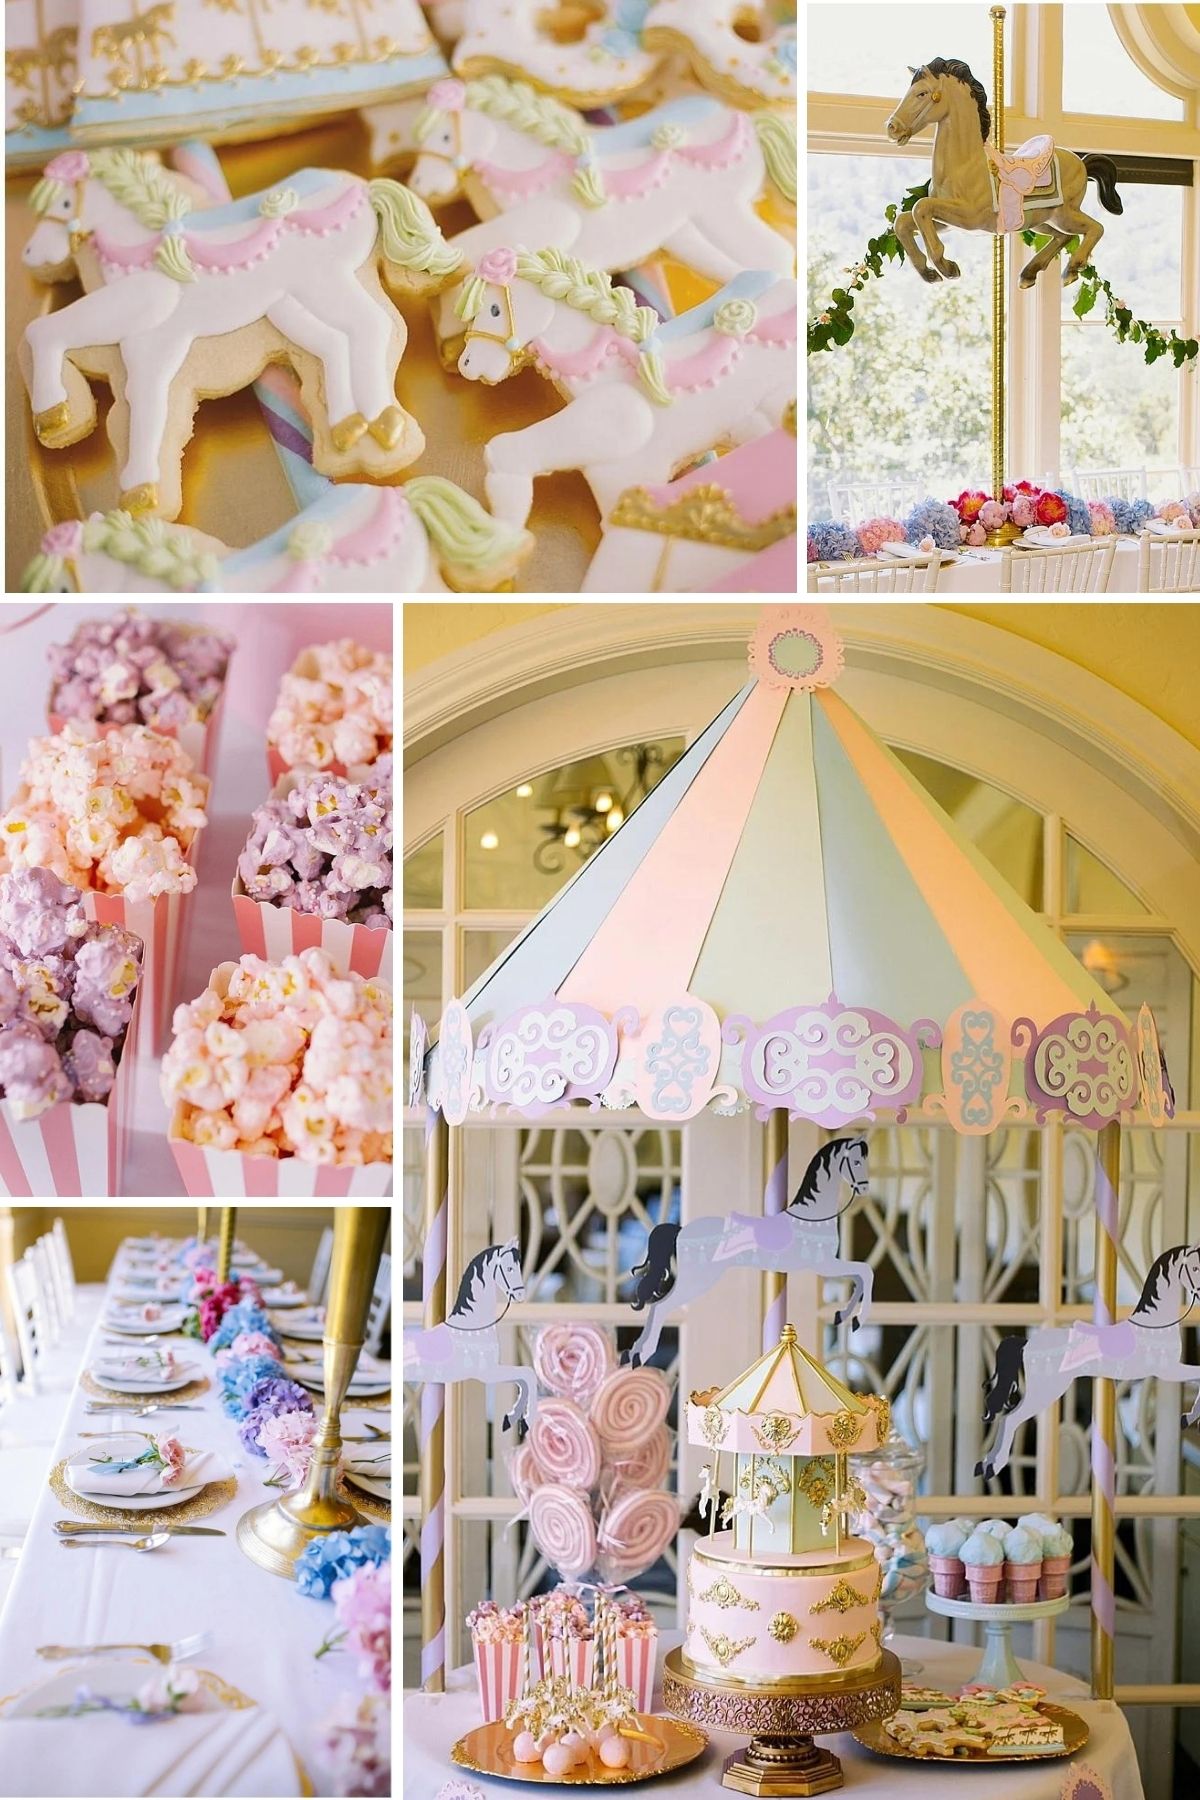 Photo collage for carousel party theme including cookies, balloons, and table settings.